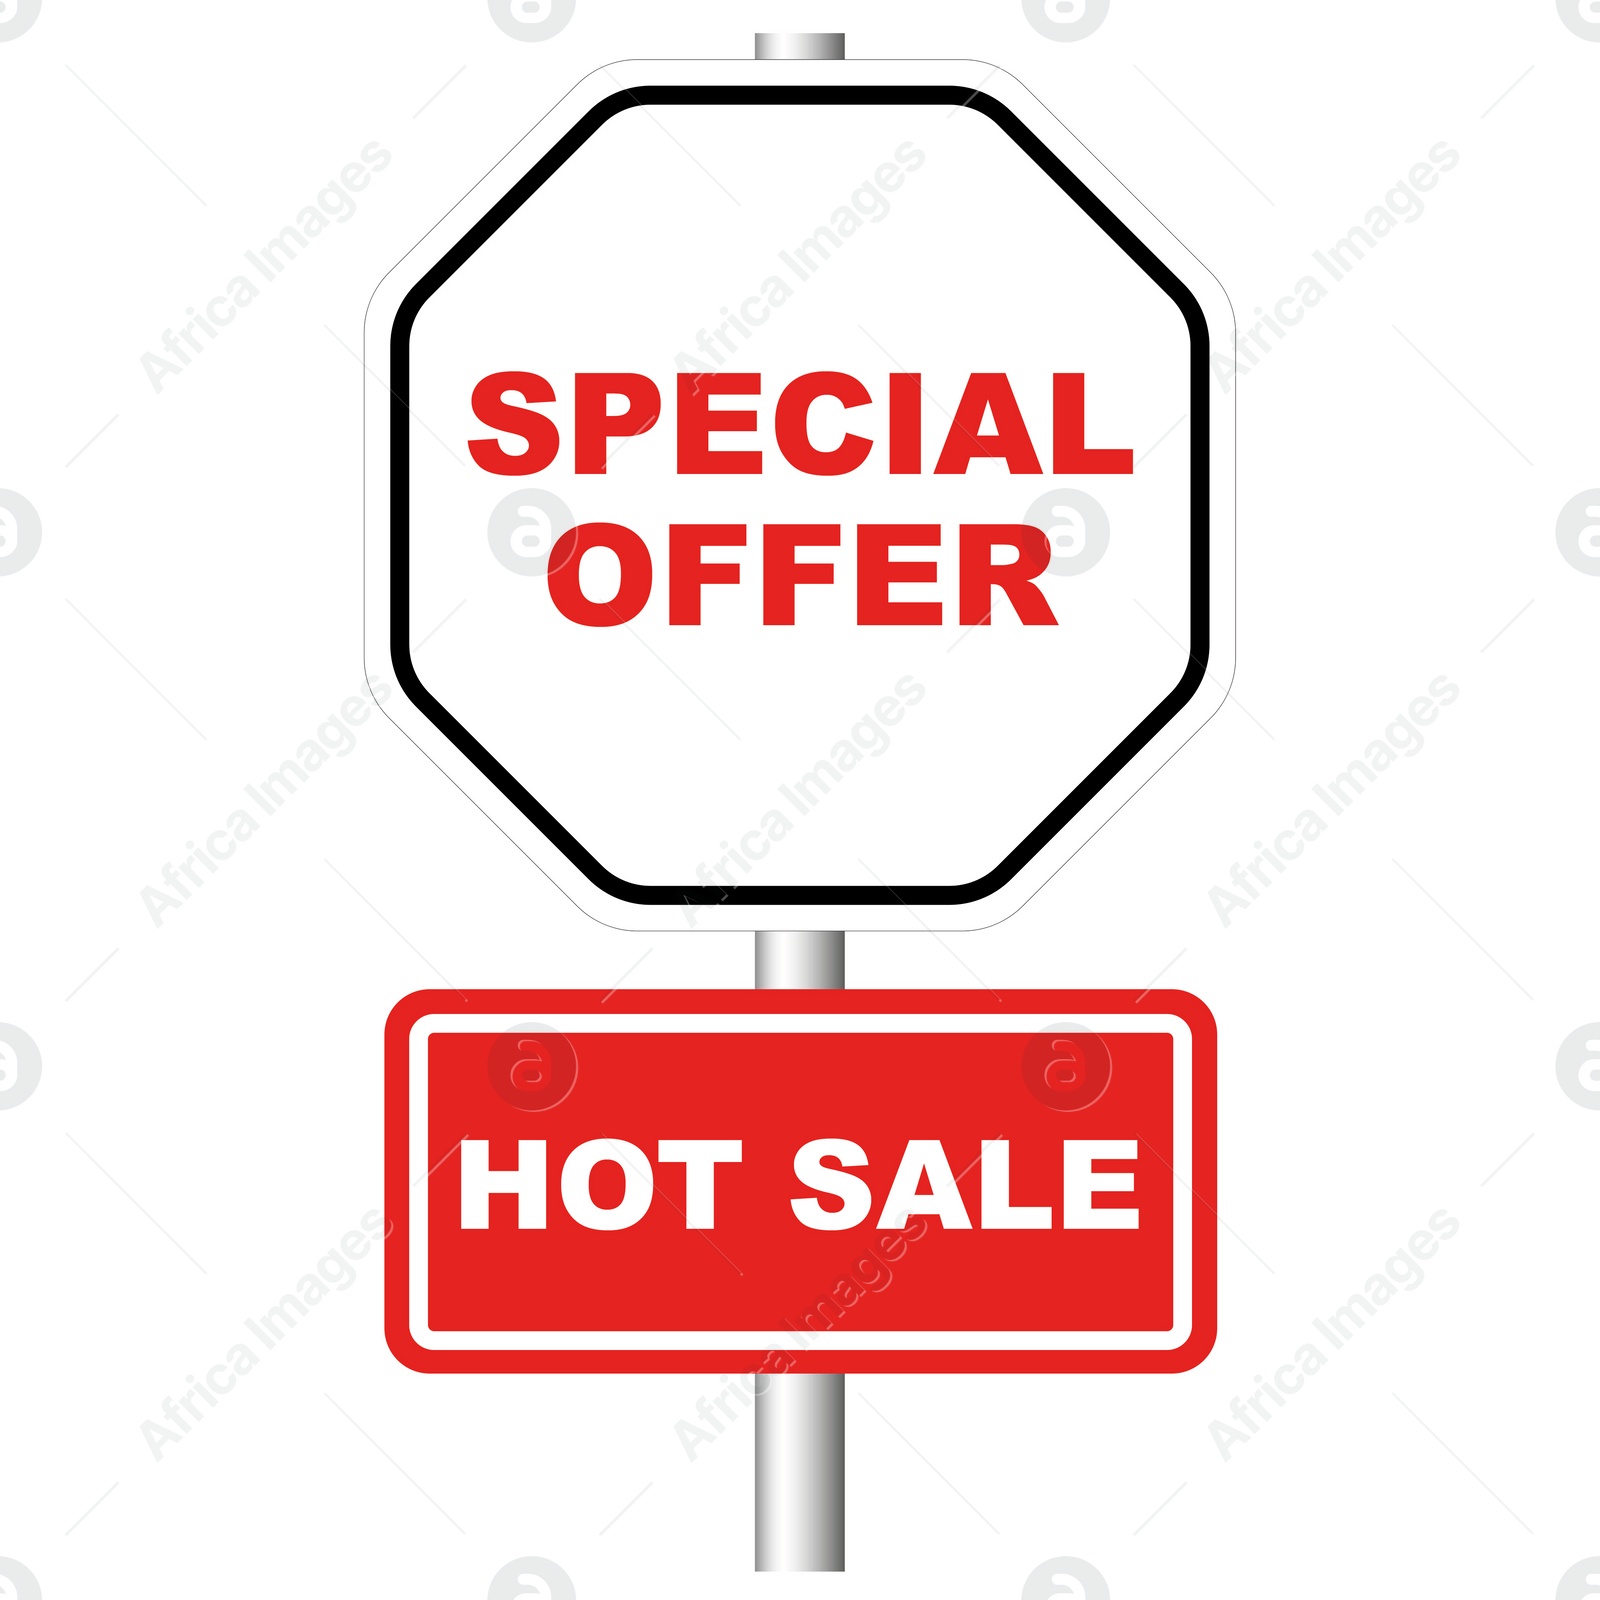 Illustration of Road signpost with words Special Offer, Hot Sale on white background